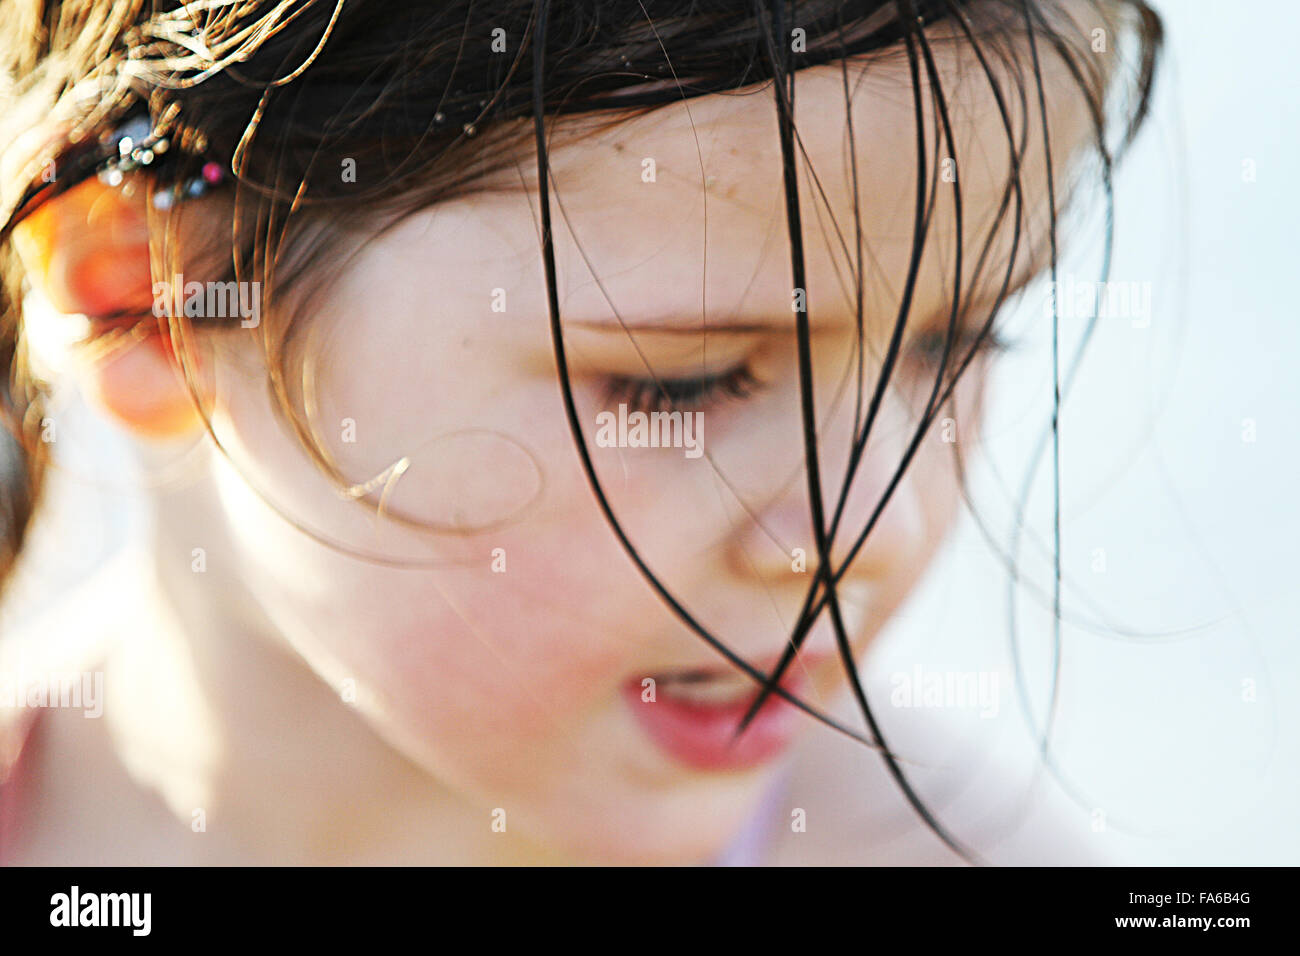 Portrait of a girl with wet hair Stock Photo